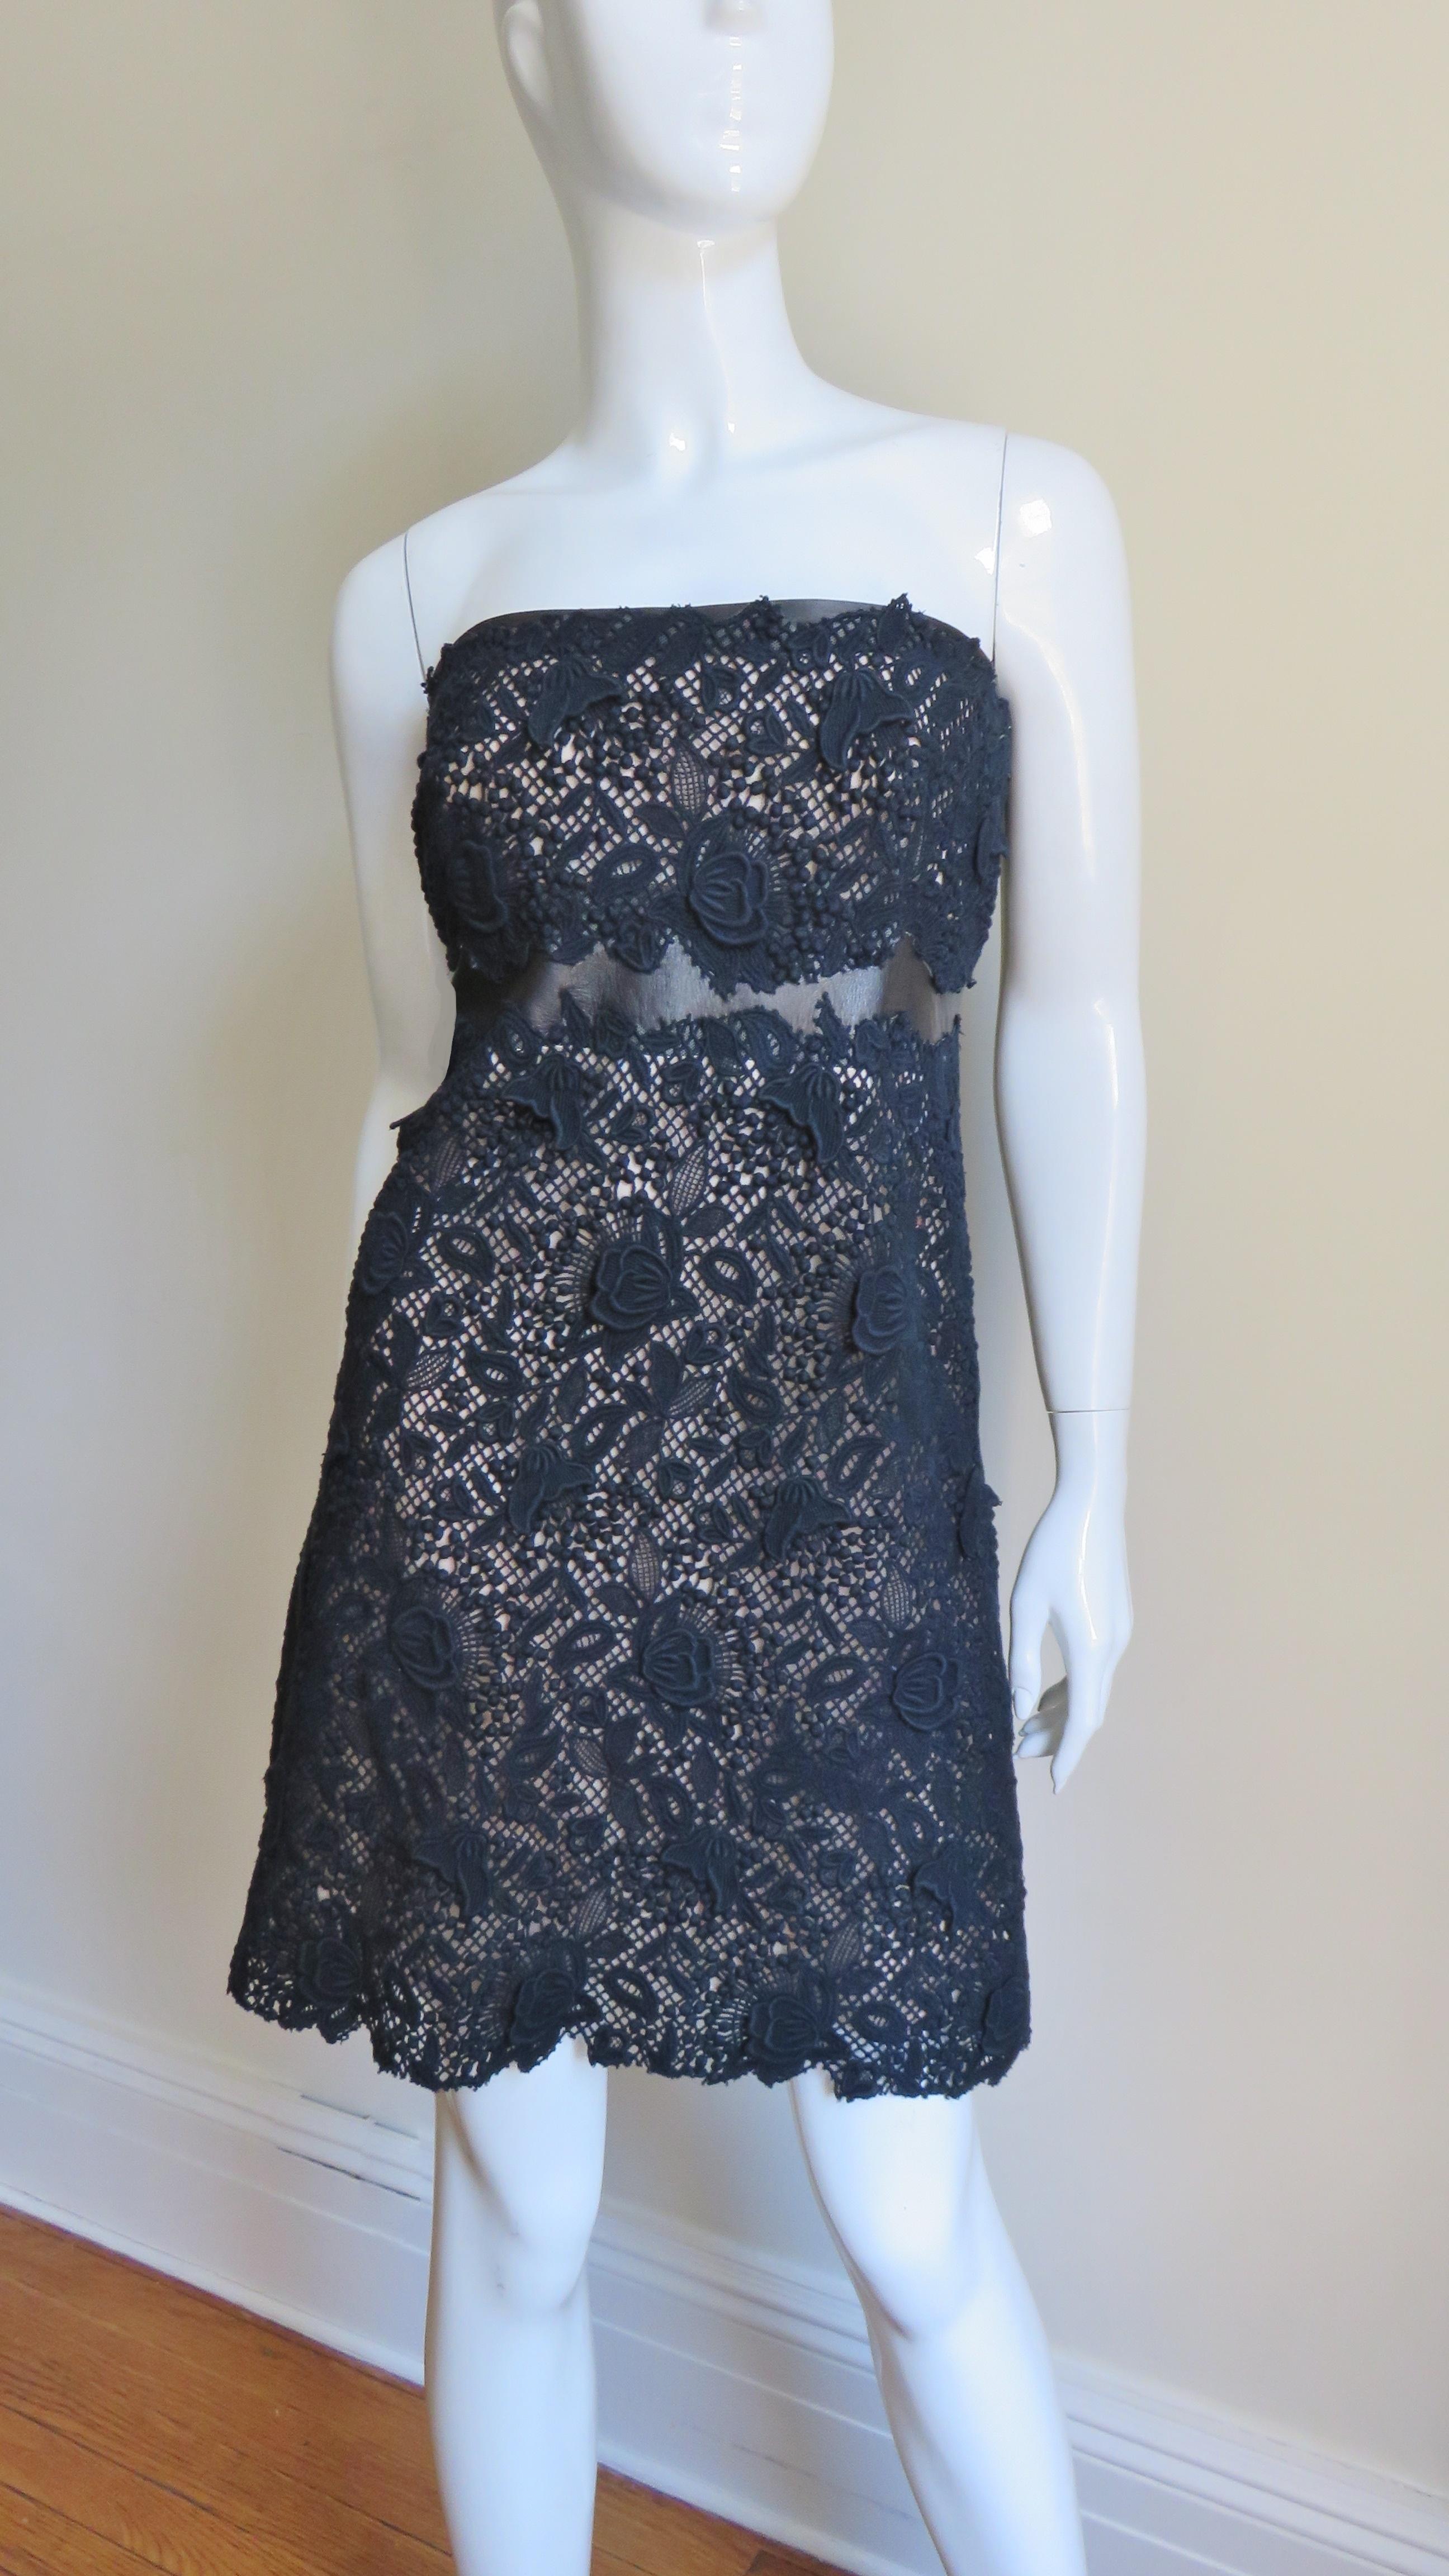 A fabulous strapless black lace dress from Valentino.  It has a leather band above and below the bust peaking out through the natural line of the lace's edge.  The skirt has a gentle A line with the hem again following the pattern of the lace. 